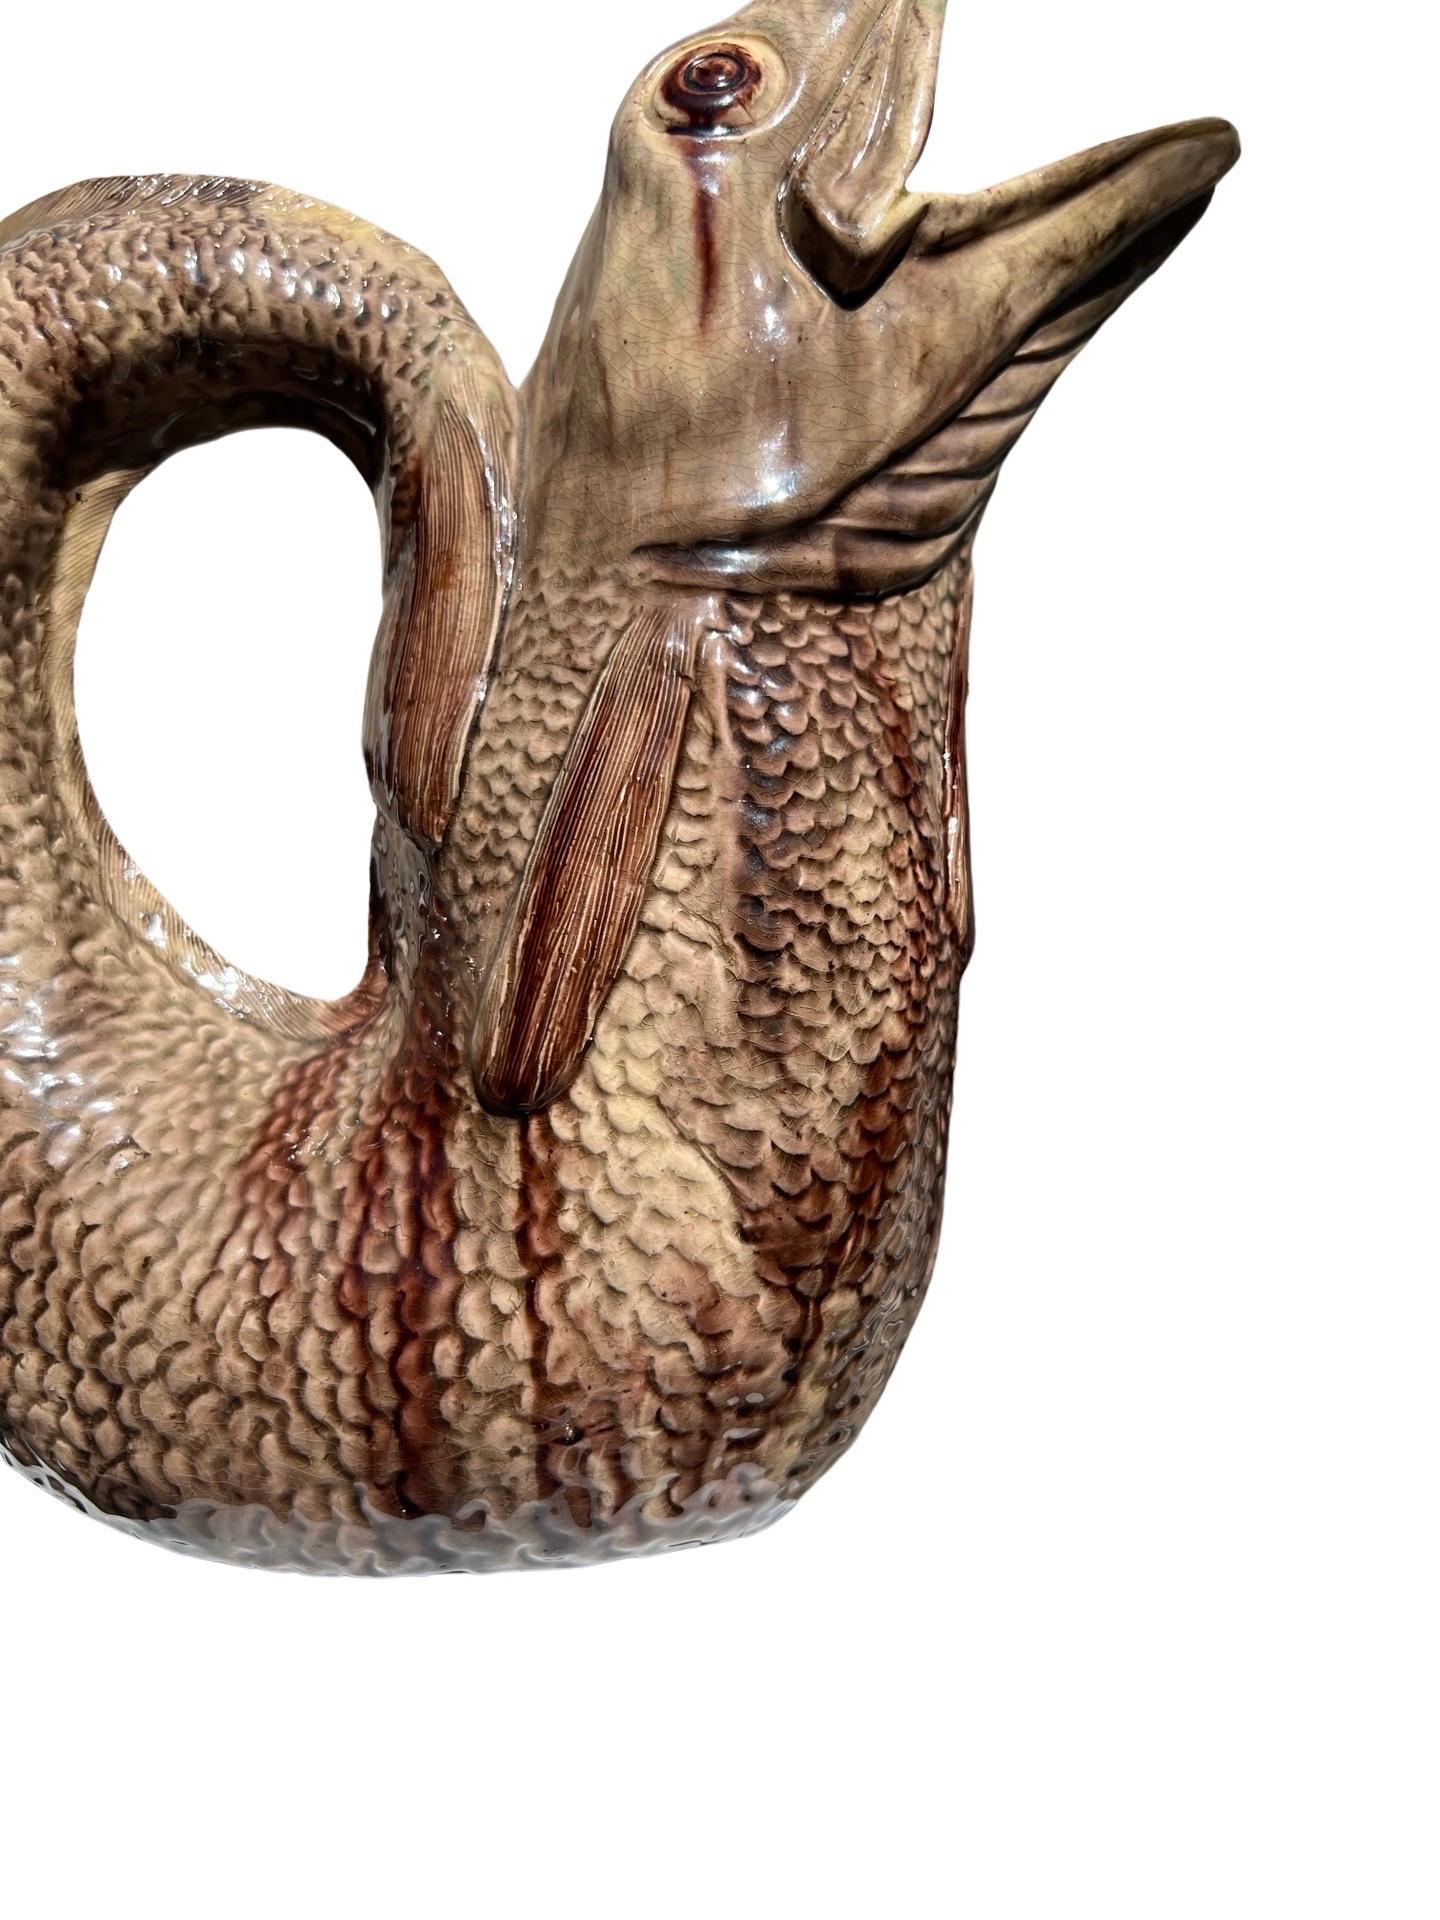 Aesthetic Movement Unusual 19th Century Large Eel Form Majolica Pottery Pitcher For Sale